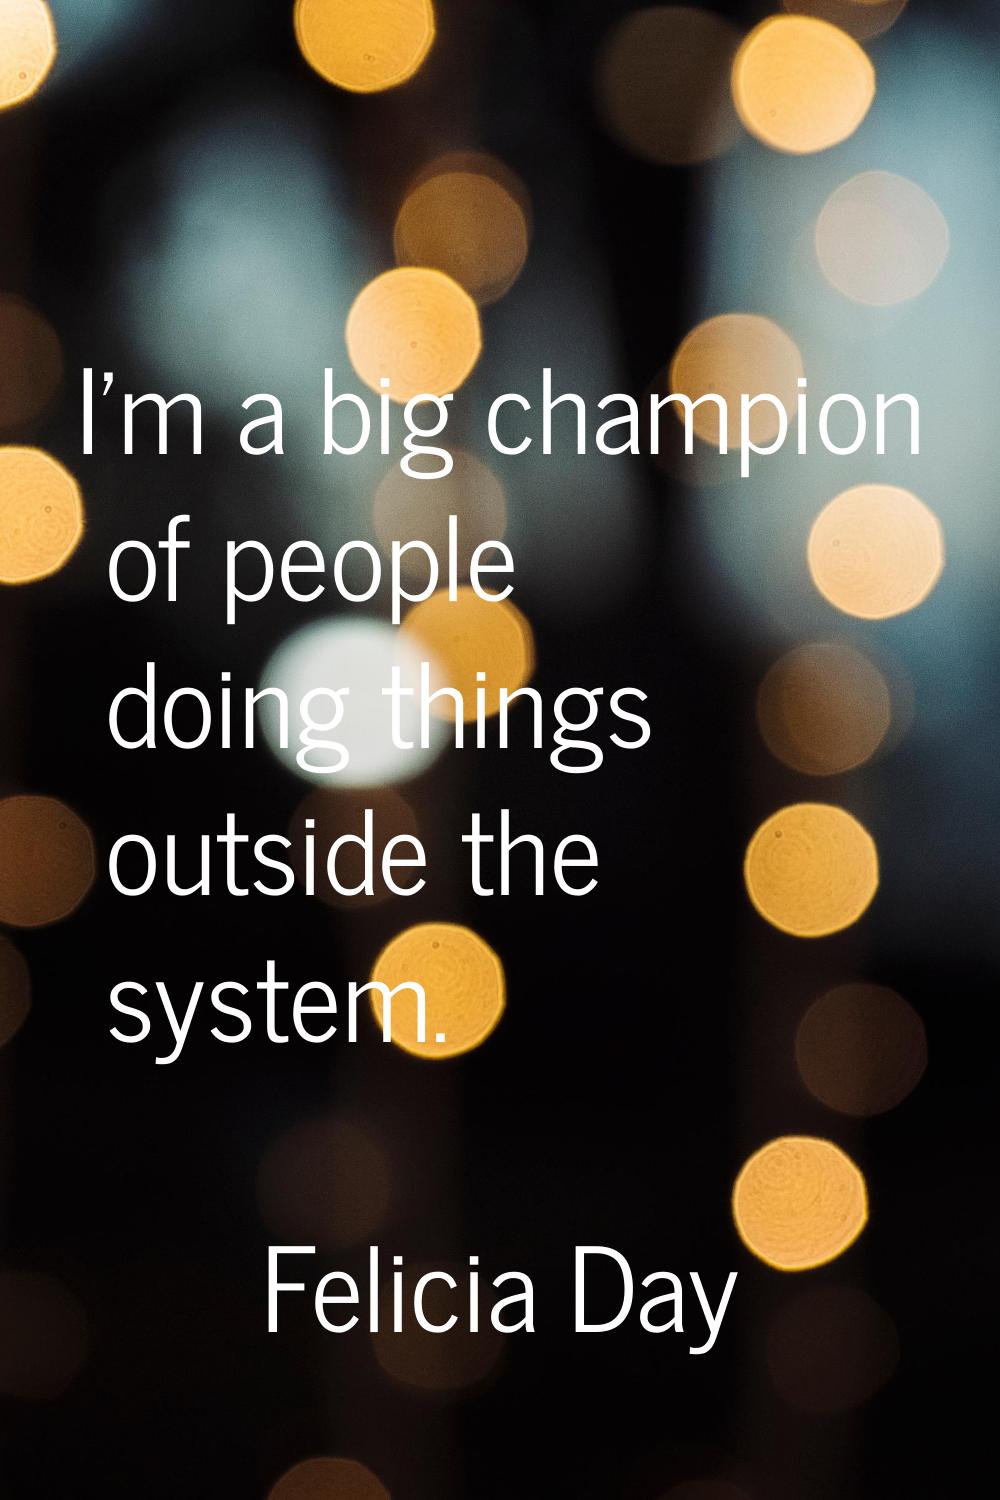 I'm a big champion of people doing things outside the system.